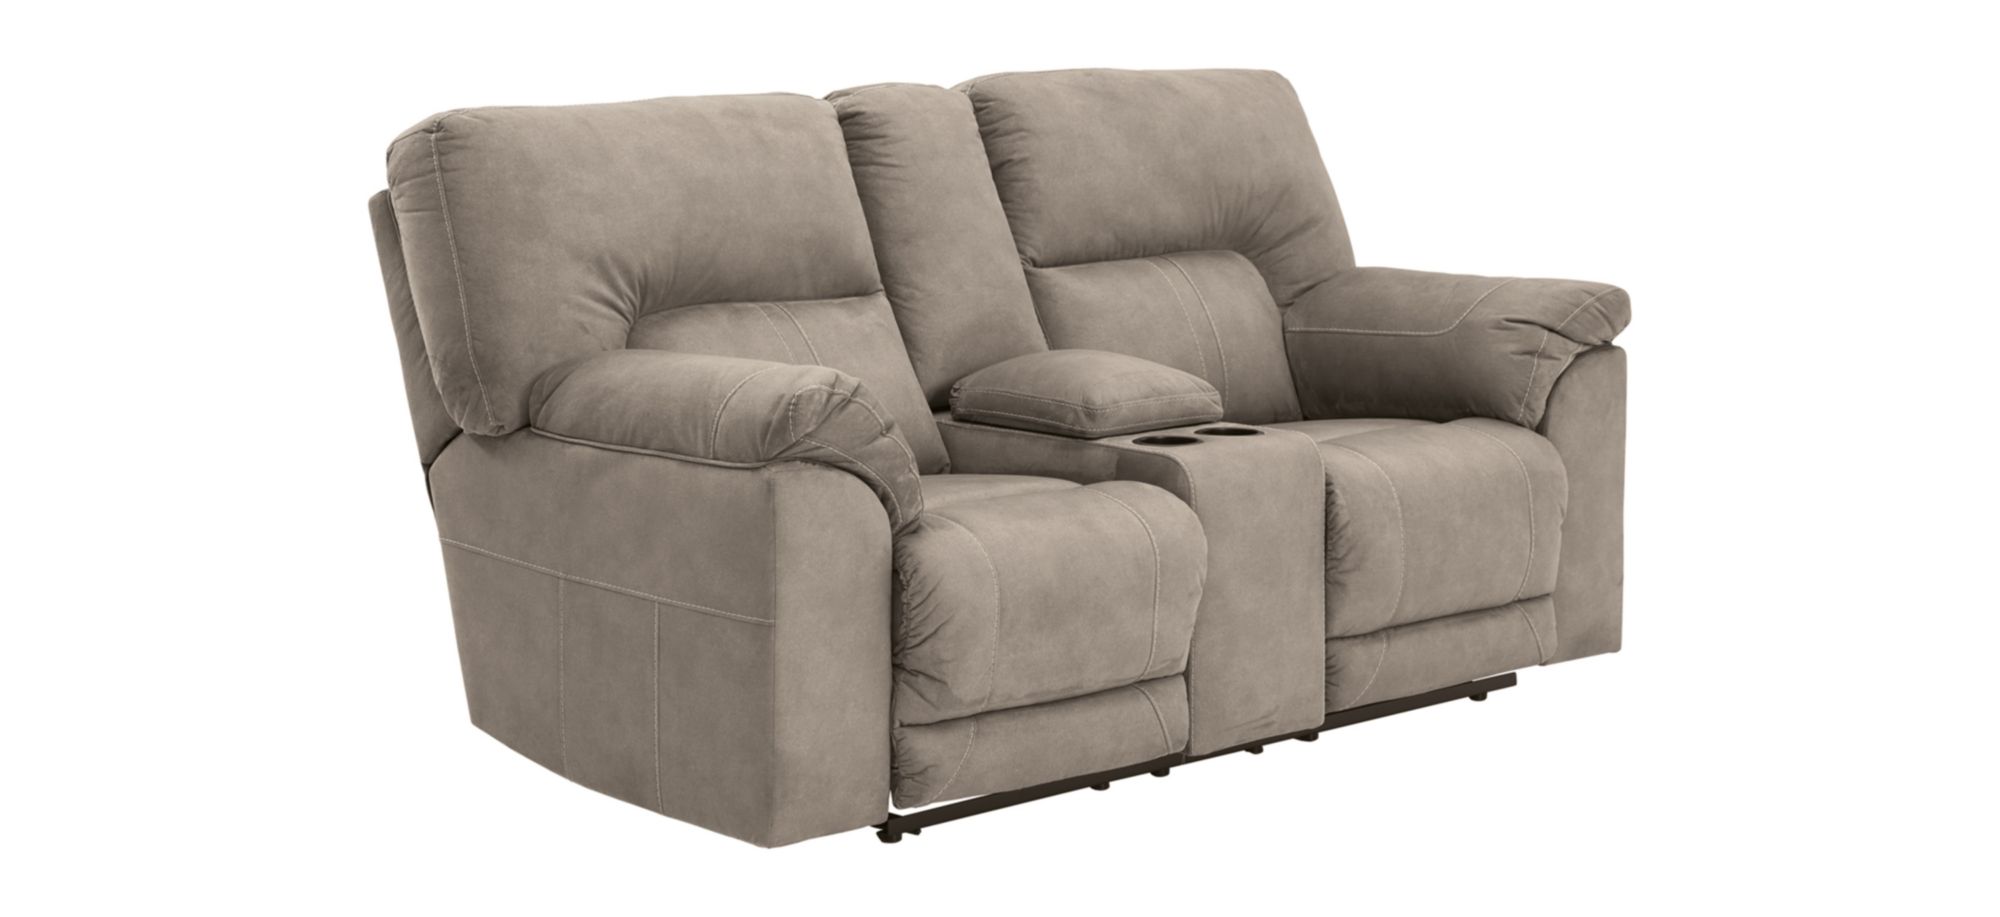 Cavalcade Double Recliner Loveseat w/Console in Slate by Ashley Furniture